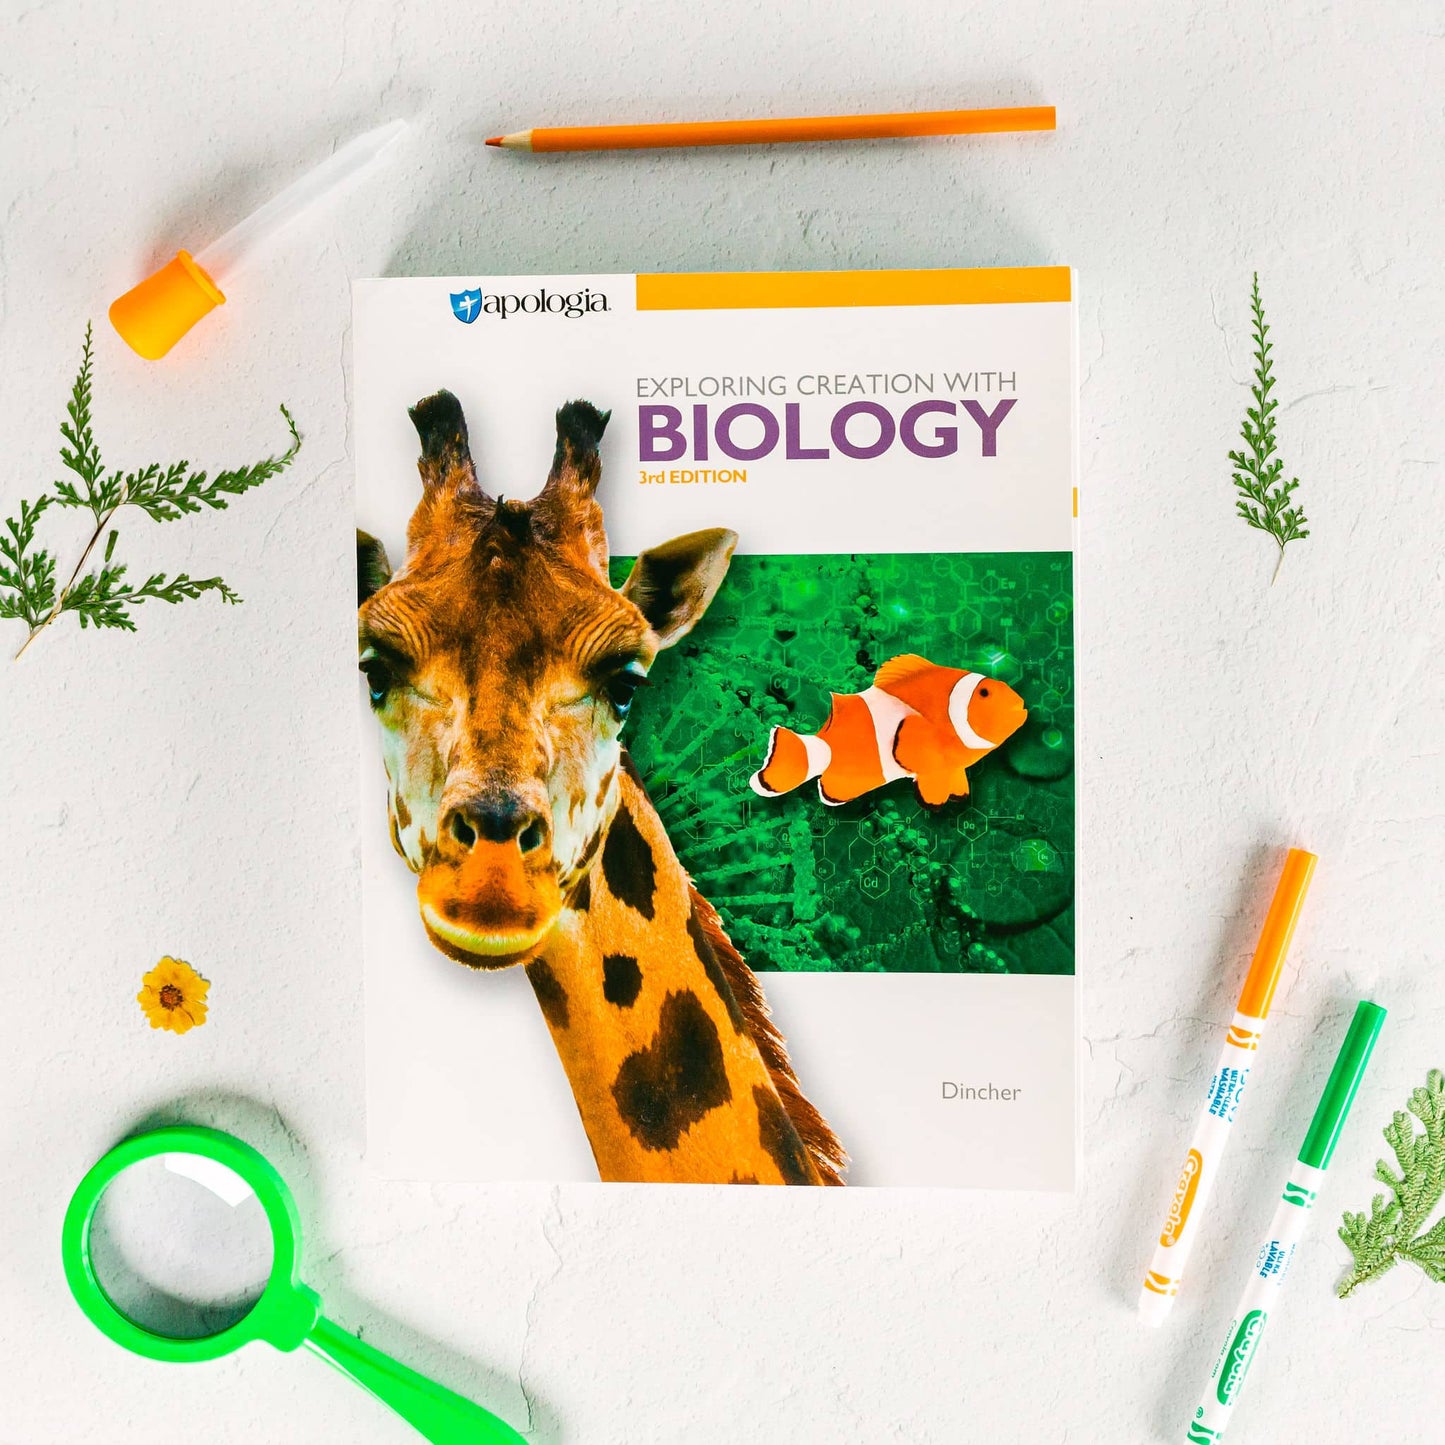 Exploring Creation with Biology, 3rd Ed